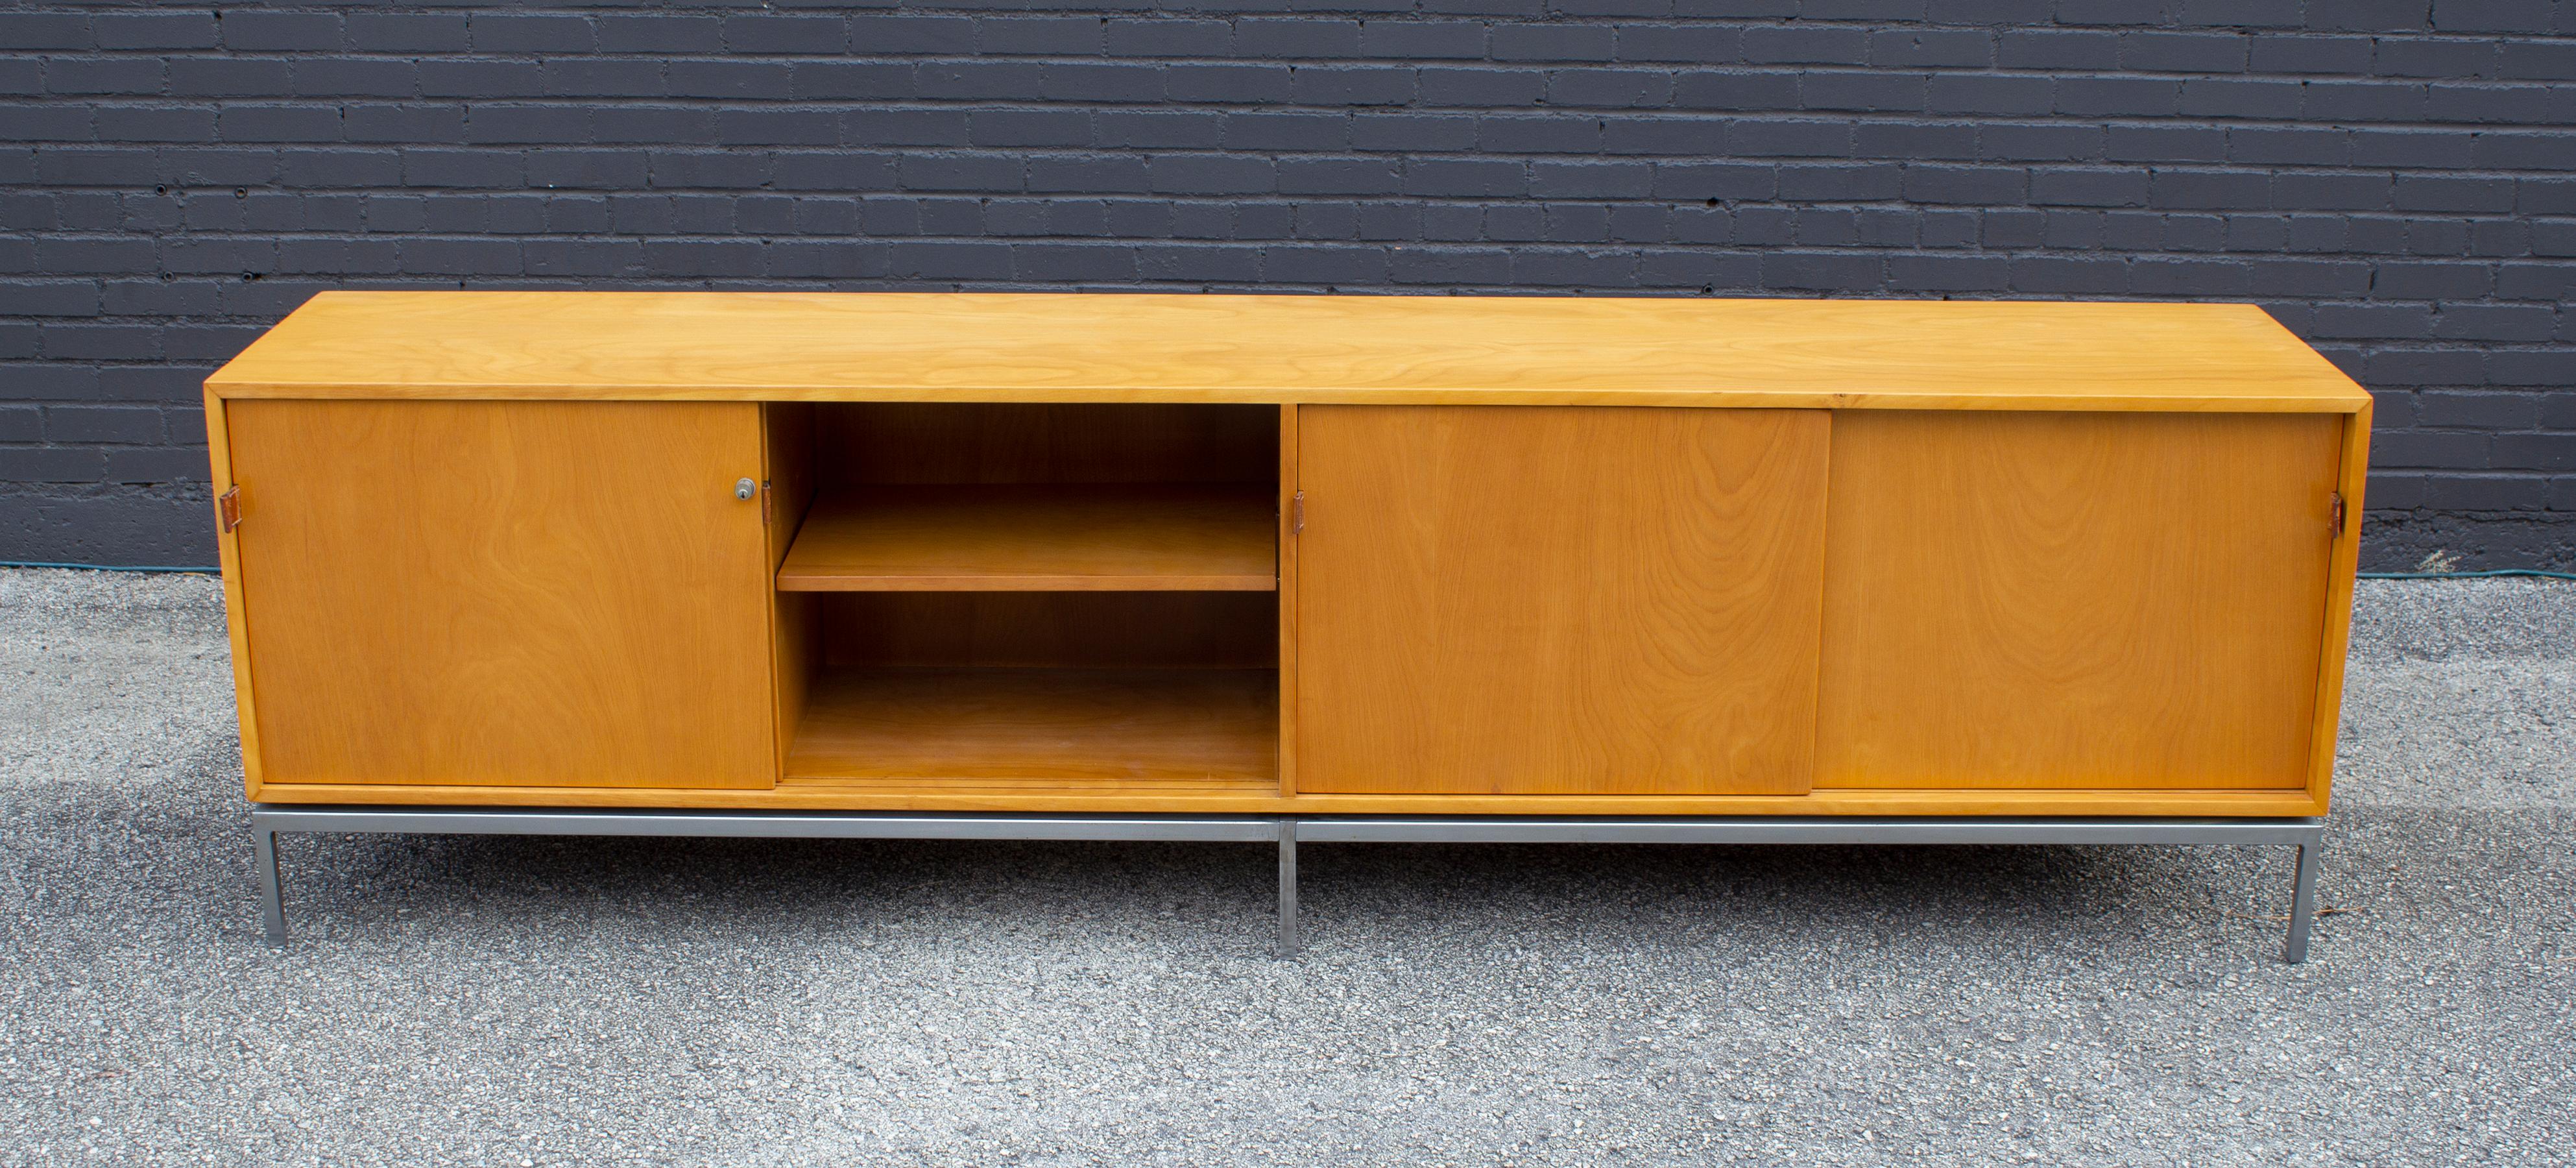 Florence Knoll Maple Credenza with Leather Pulls and Oak Drawers Early 1950s For Sale 6